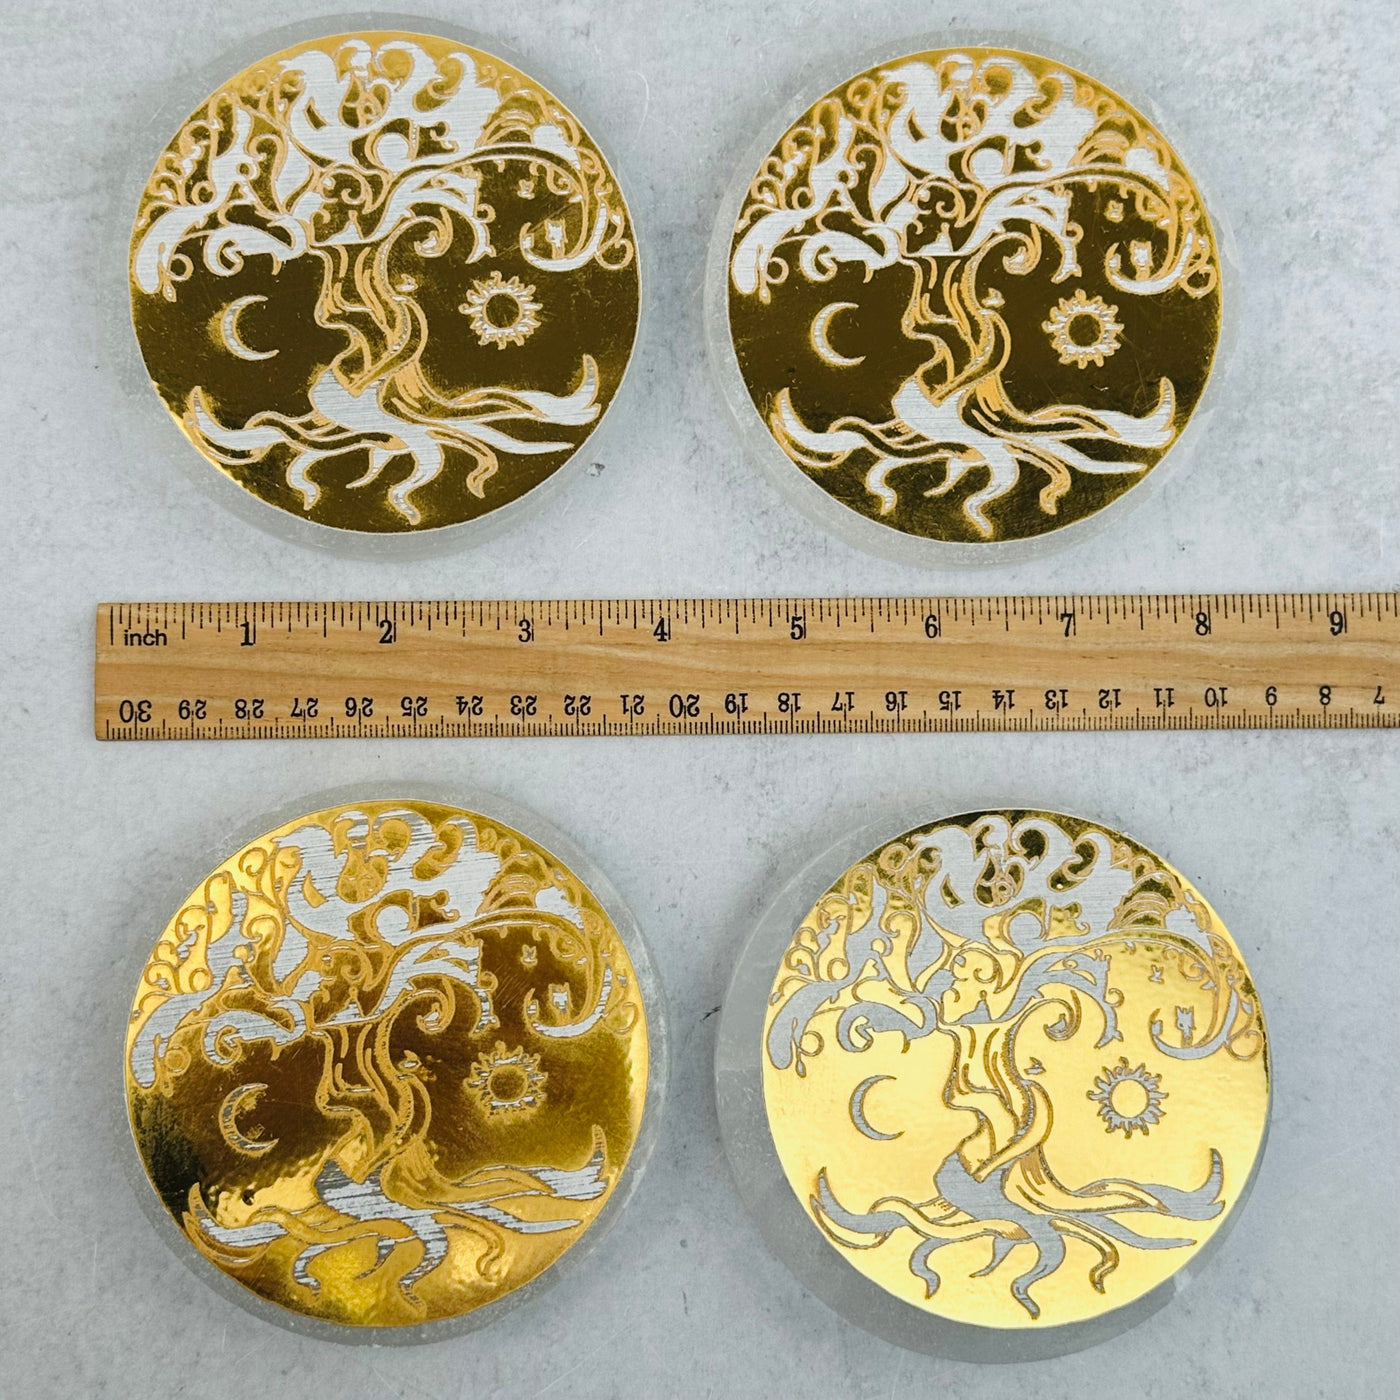 Selenite Round Charging Plate - Gold Tree of Life Design next to a ruler for size reference 